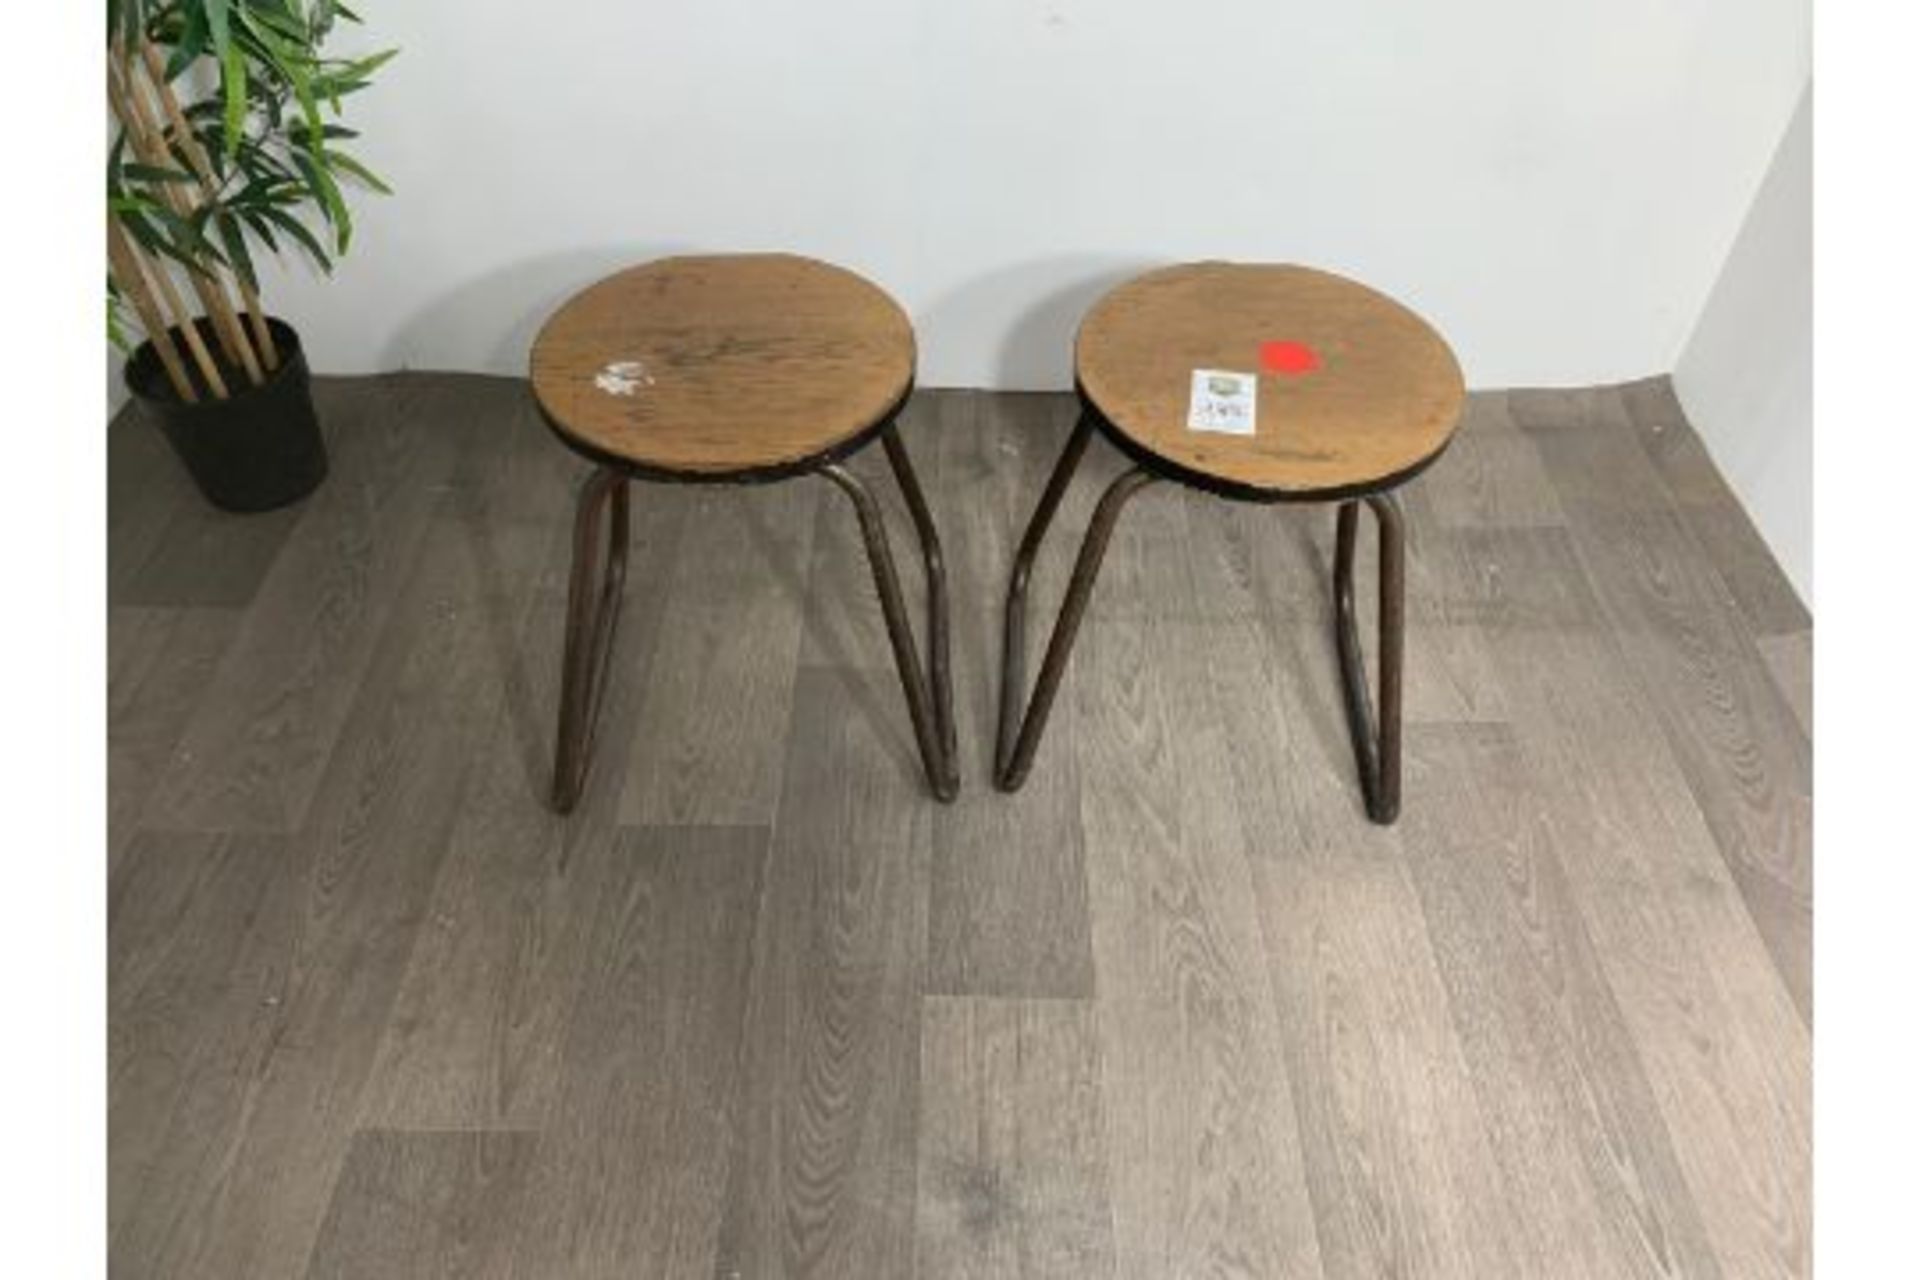 Industrial Style Wooden Stool with Steel Legs x2 - Image 2 of 2